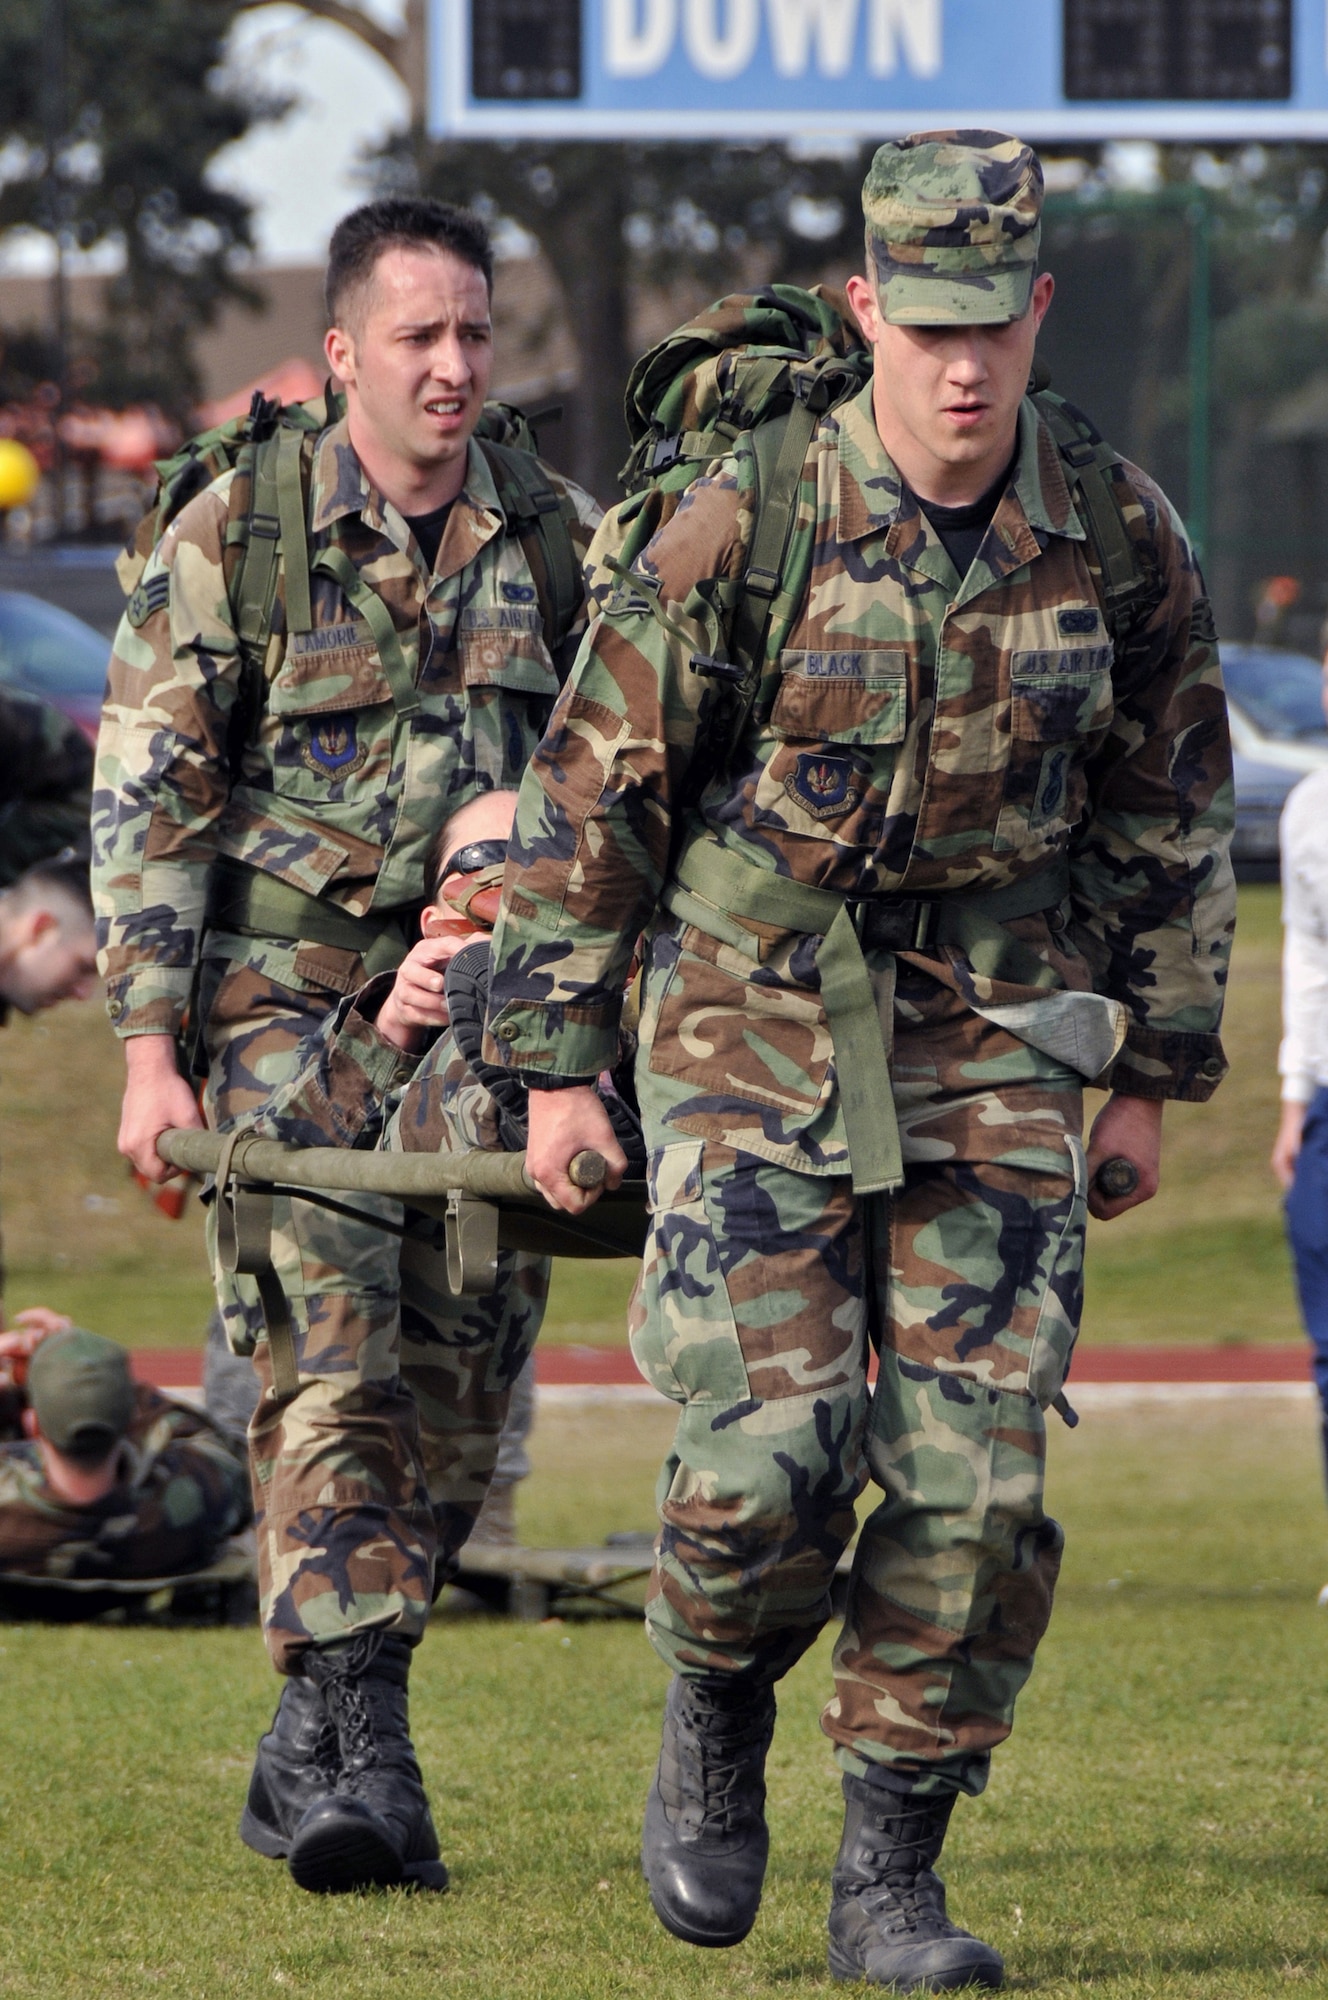 ROYAL AIR FORCE LAKENHEATH, England -- Senior Airman Alan Black and Senior Airman Brian Lamorie carry Staff Sgt. Jessica Gibson, 48th Security Forces Squadron, during the 5K Ruck March May 11, 2009. The litter carry was the obstacle during the 5k Ruck march for The 2009 National Police Week.  (U.S. Air Force photo by Airman 1st Class Perry Aston) 